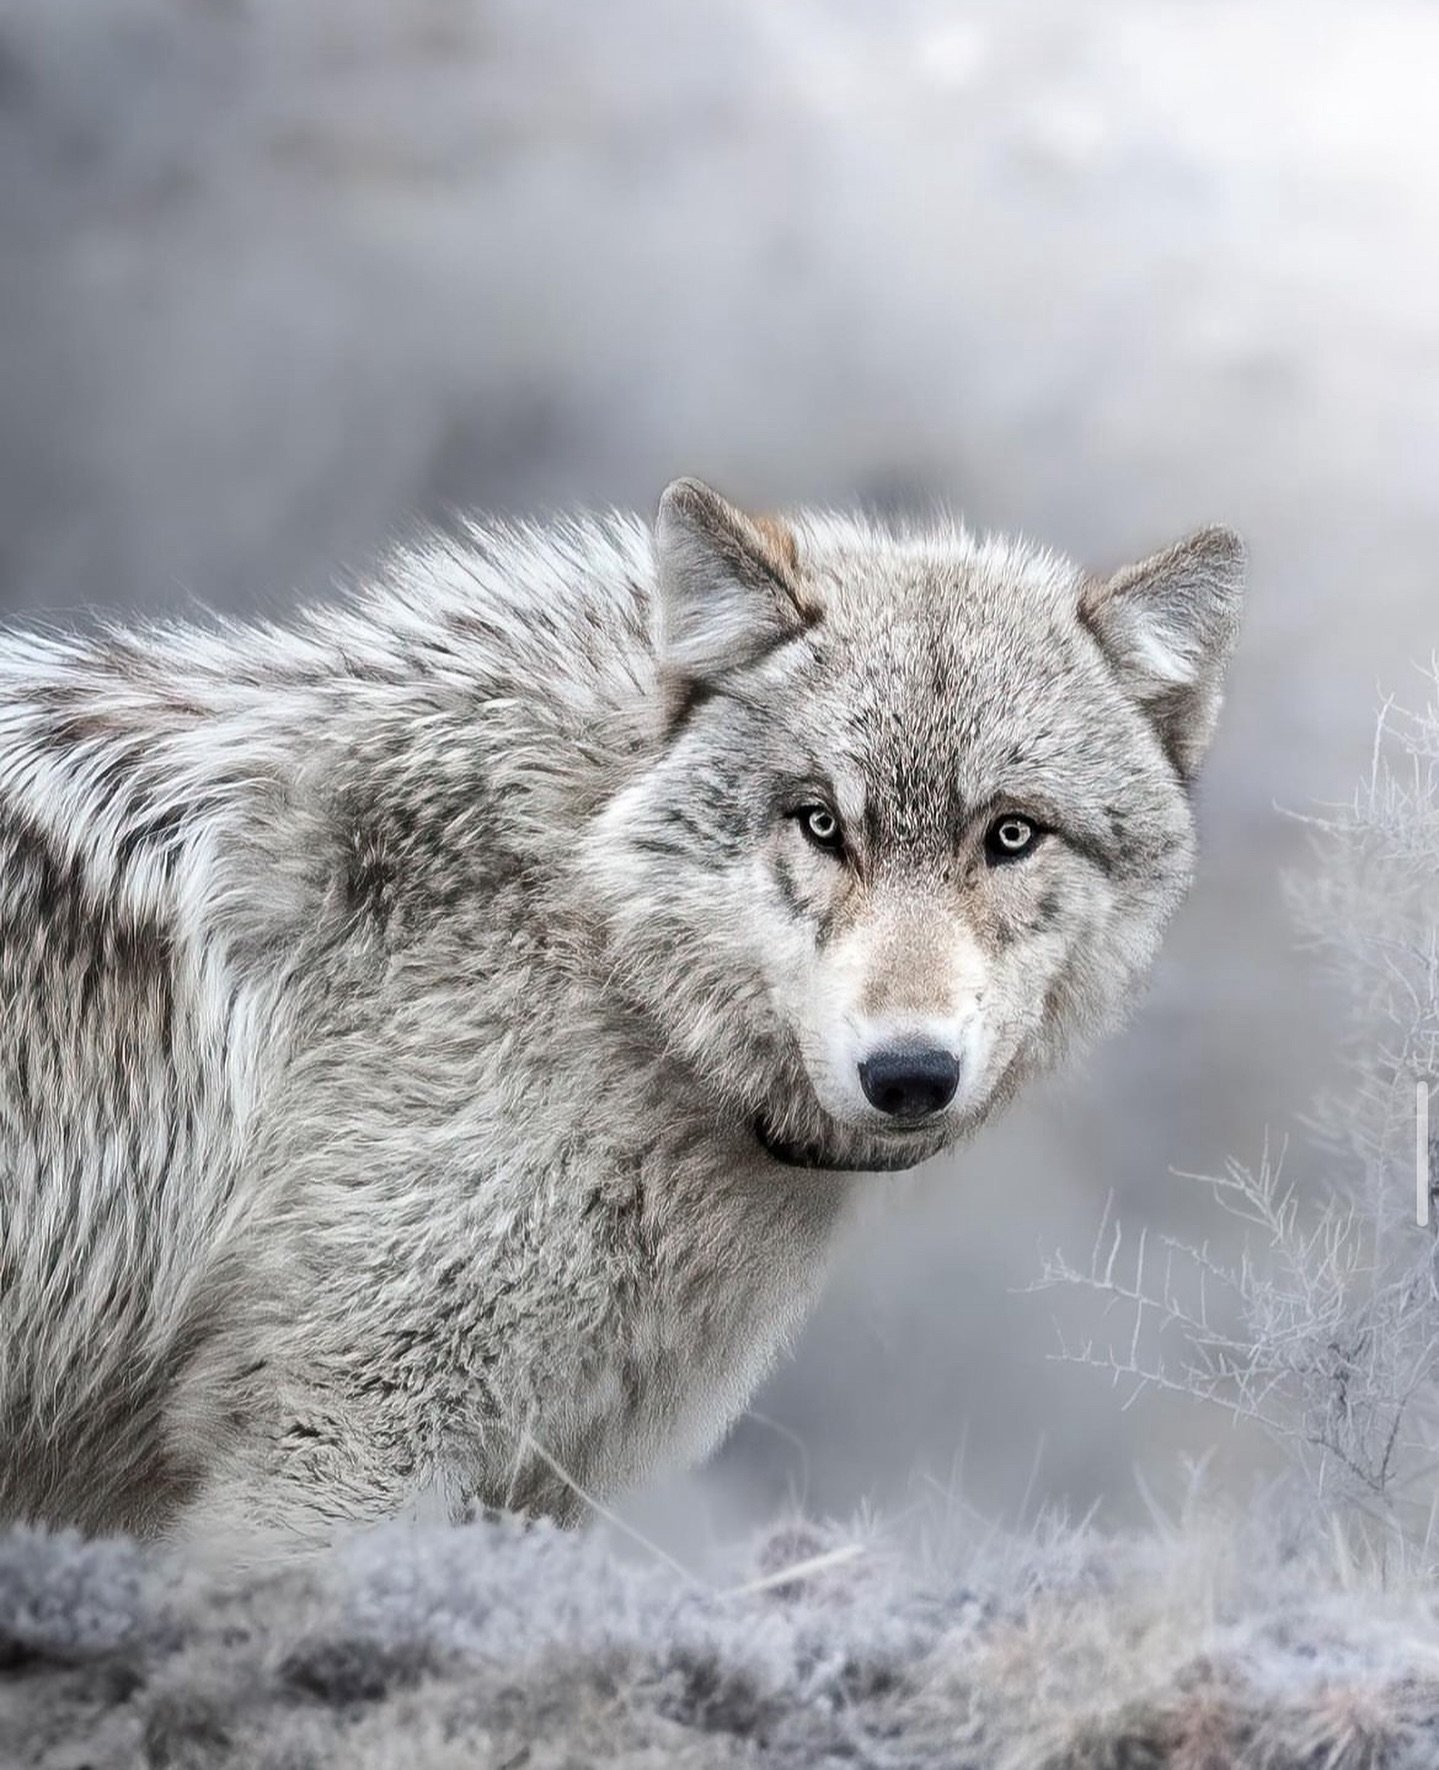 wild one worth fiercely protecting 

I want to take a moment to talk about the disgusting news from my home state of Wyoming, and how the state has failed an incredible and beautiful animal. 

A man from Wyoming ran over a wolf with a snowmobile, com